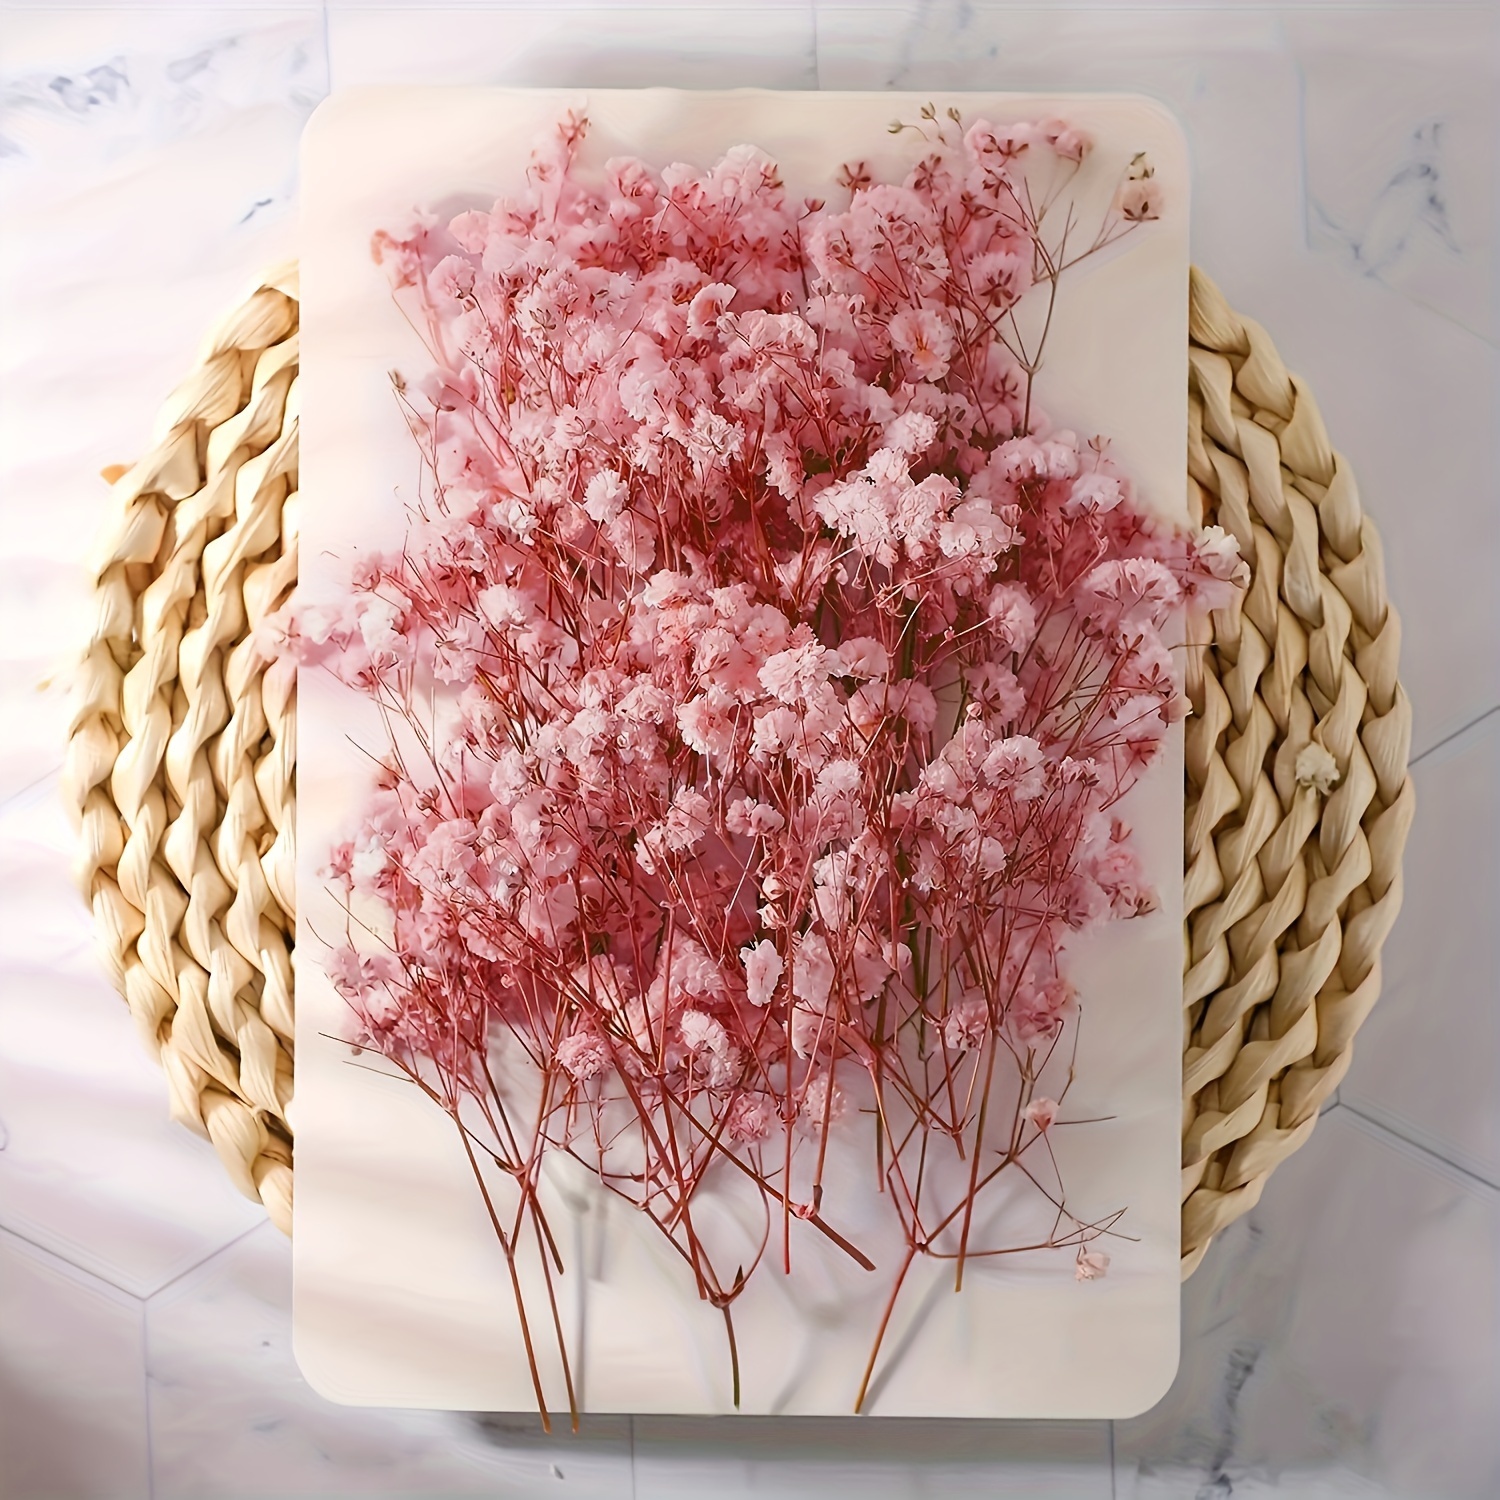 

50 Pcs Mini Dried Baby's Breath Flowers - Preserved Gypsophila Flowers In Pink And White - Ideal For Valentine's Day, Weddings, Card Making, And Diy Jewelry Casting Supplies